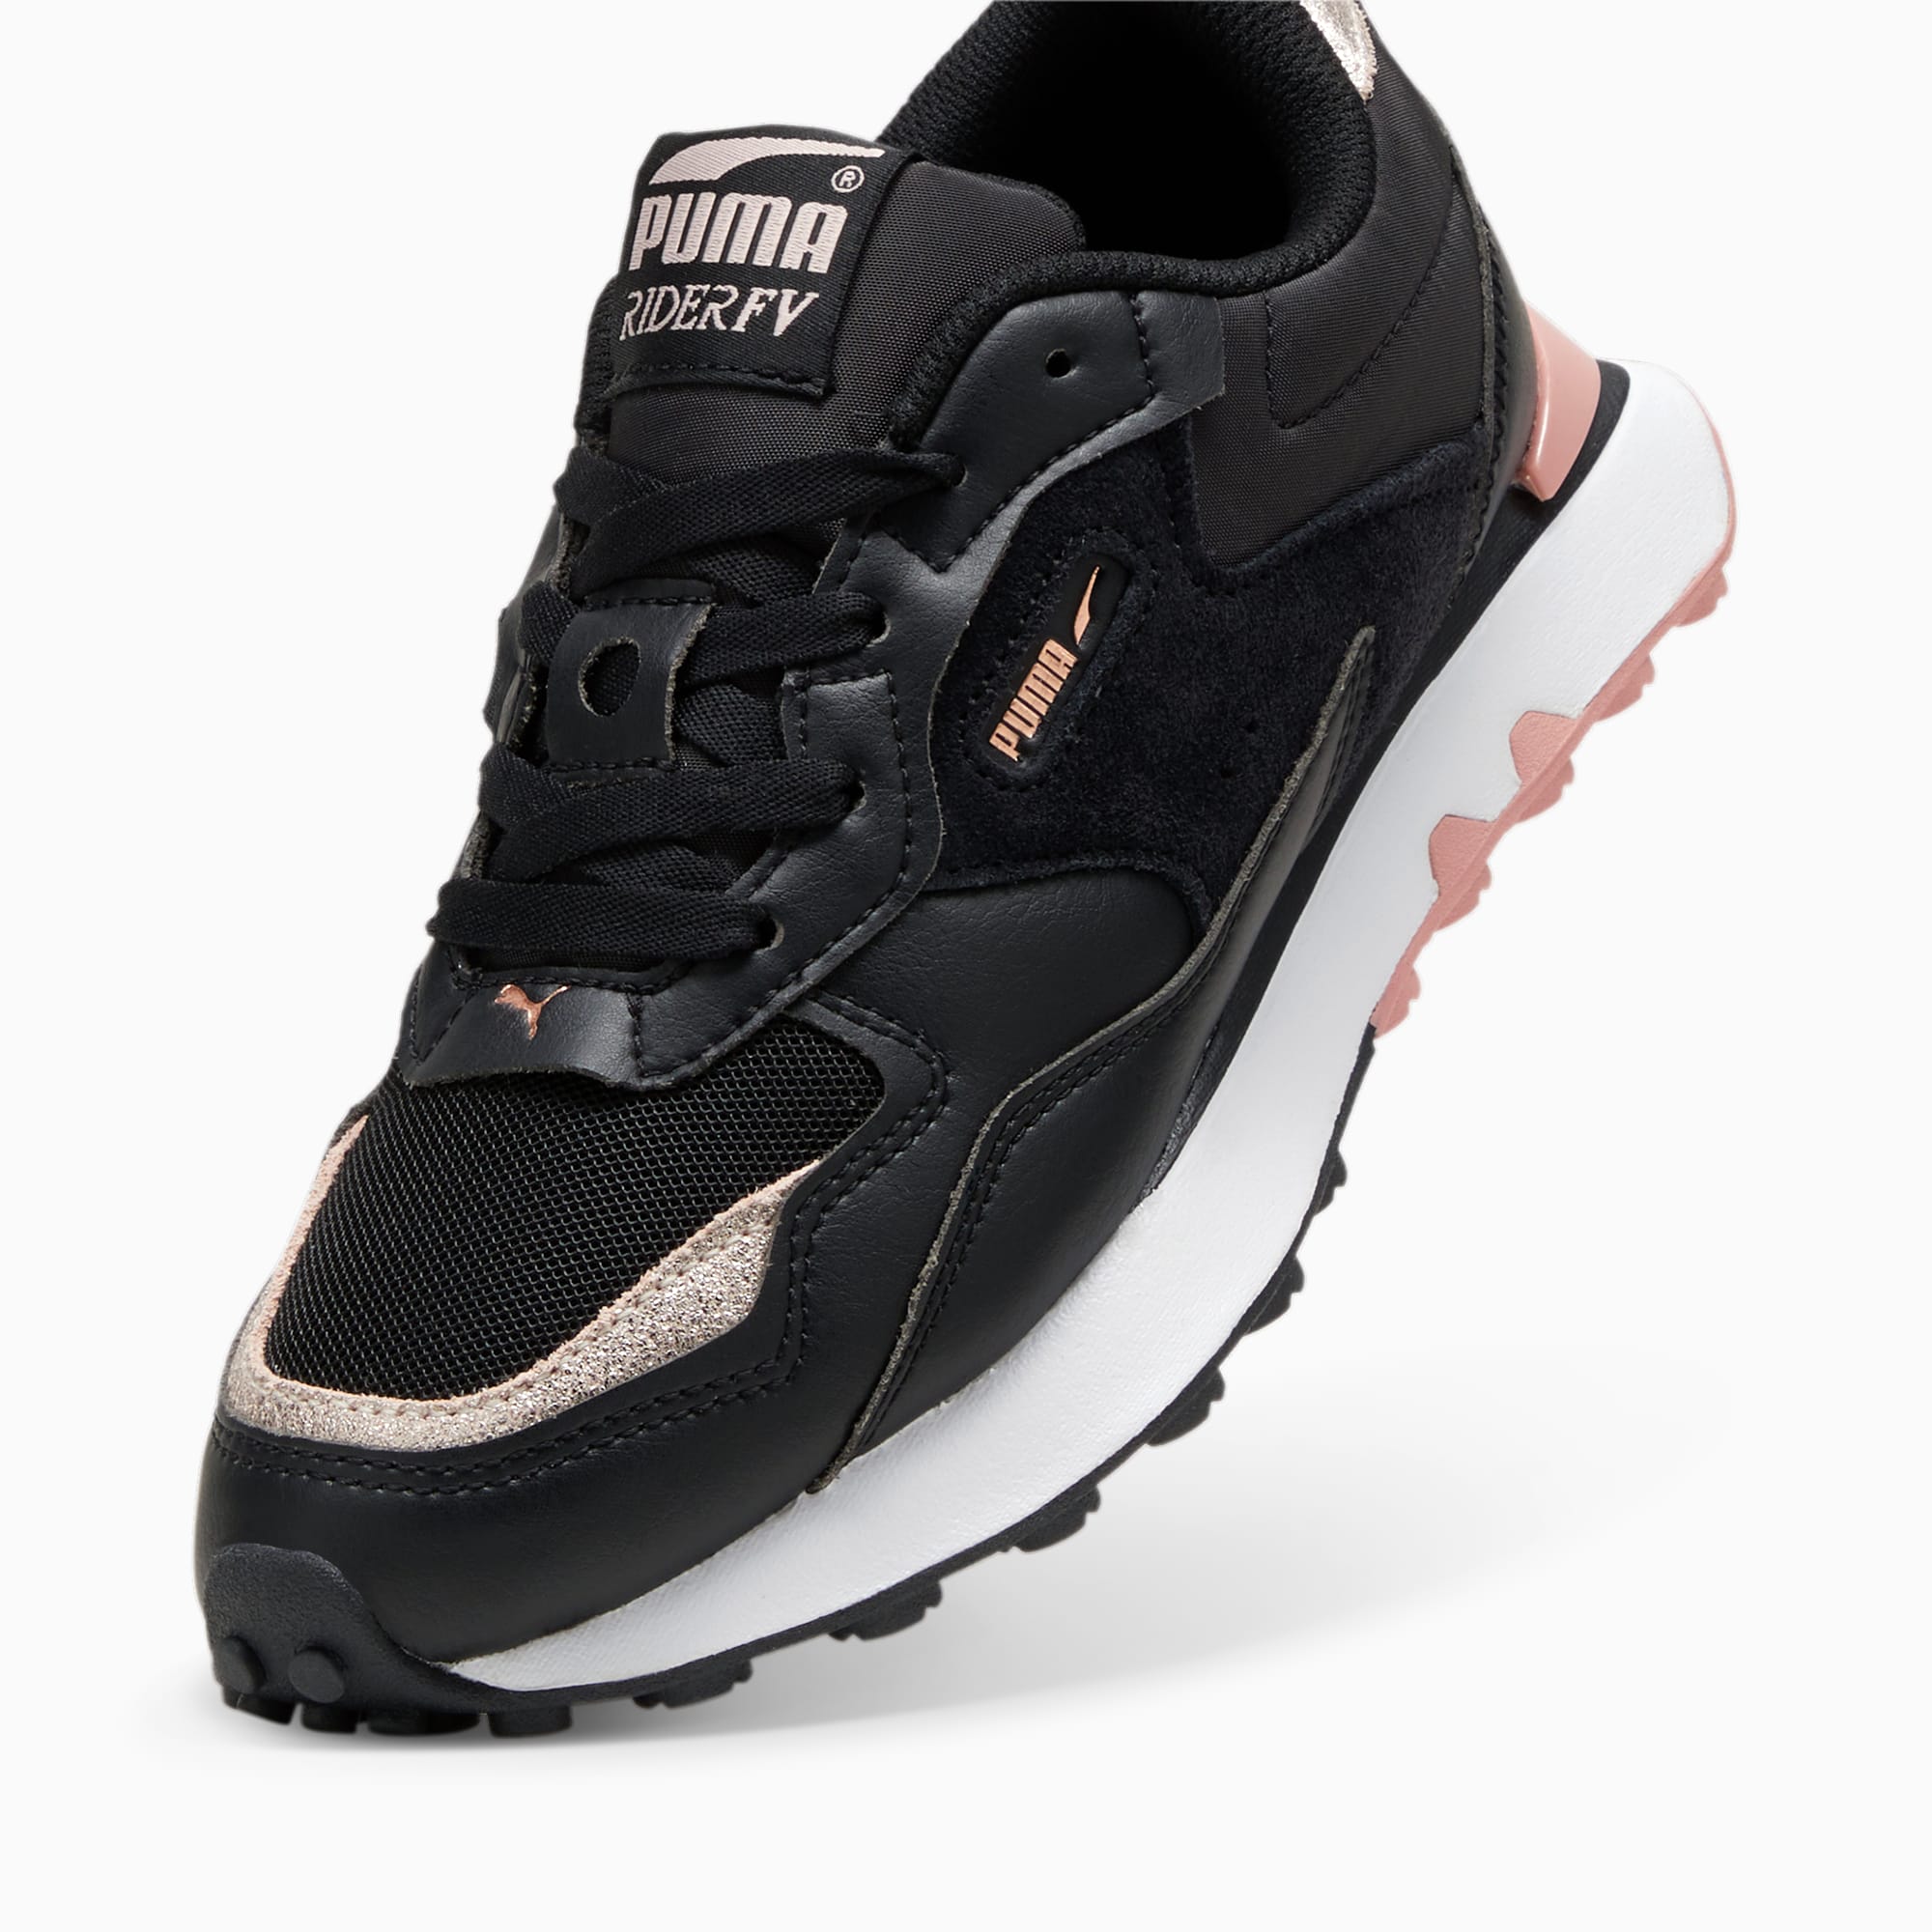 PUMA Rider Fvw Glam Women's Sneakers, Black/Rose Gold